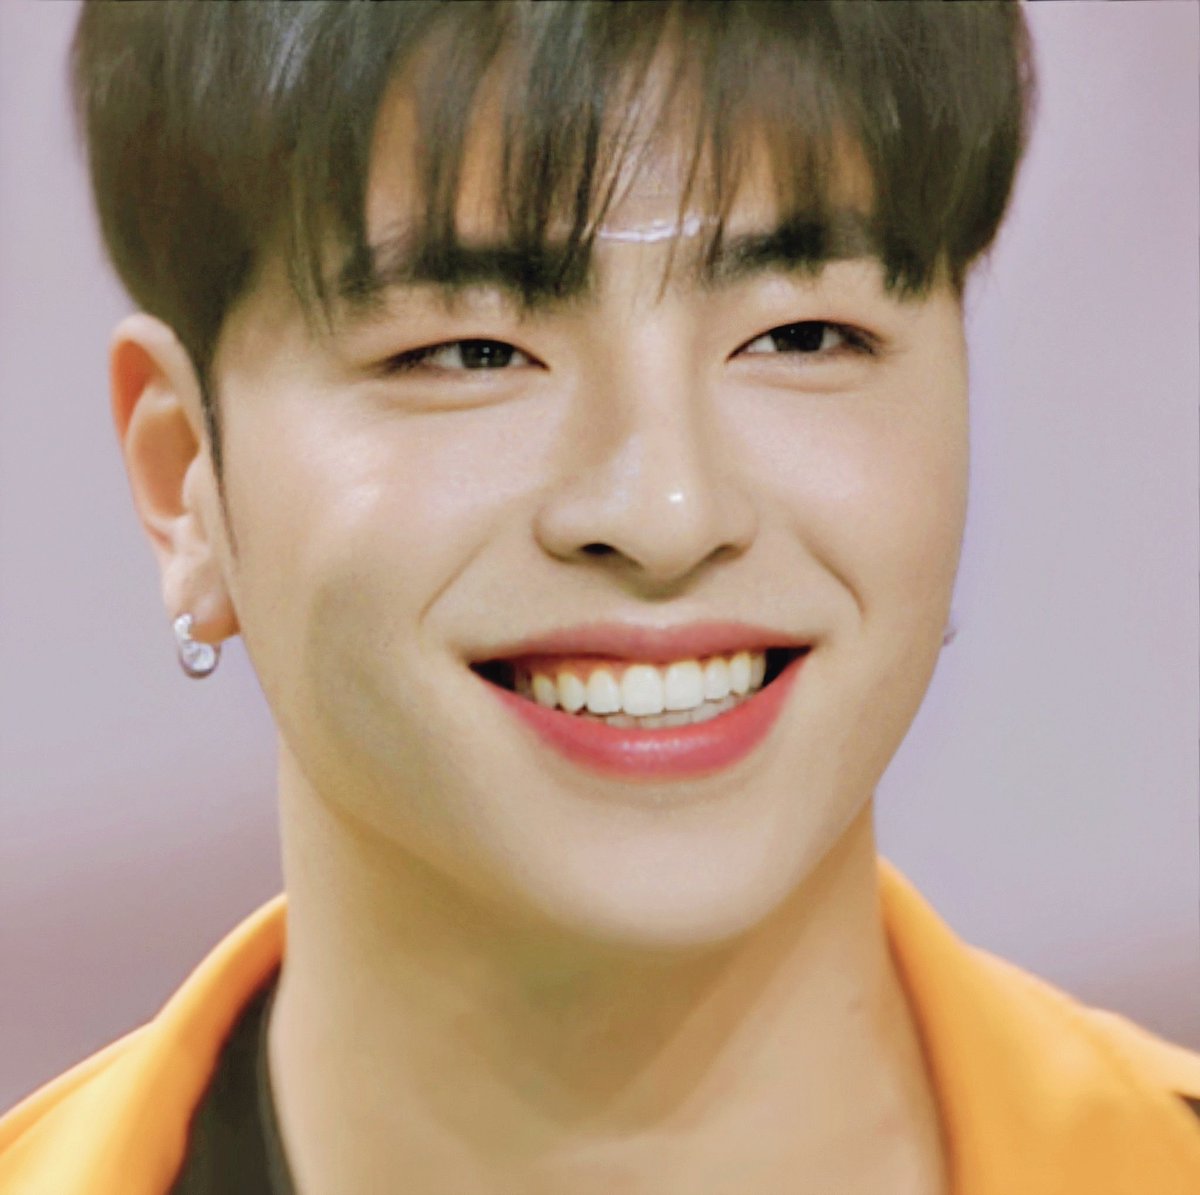 In case if you need some positivity on your tl, here's Junhoe's bright smiles for you!  #JUNHOE  #구준회  #ジュネ